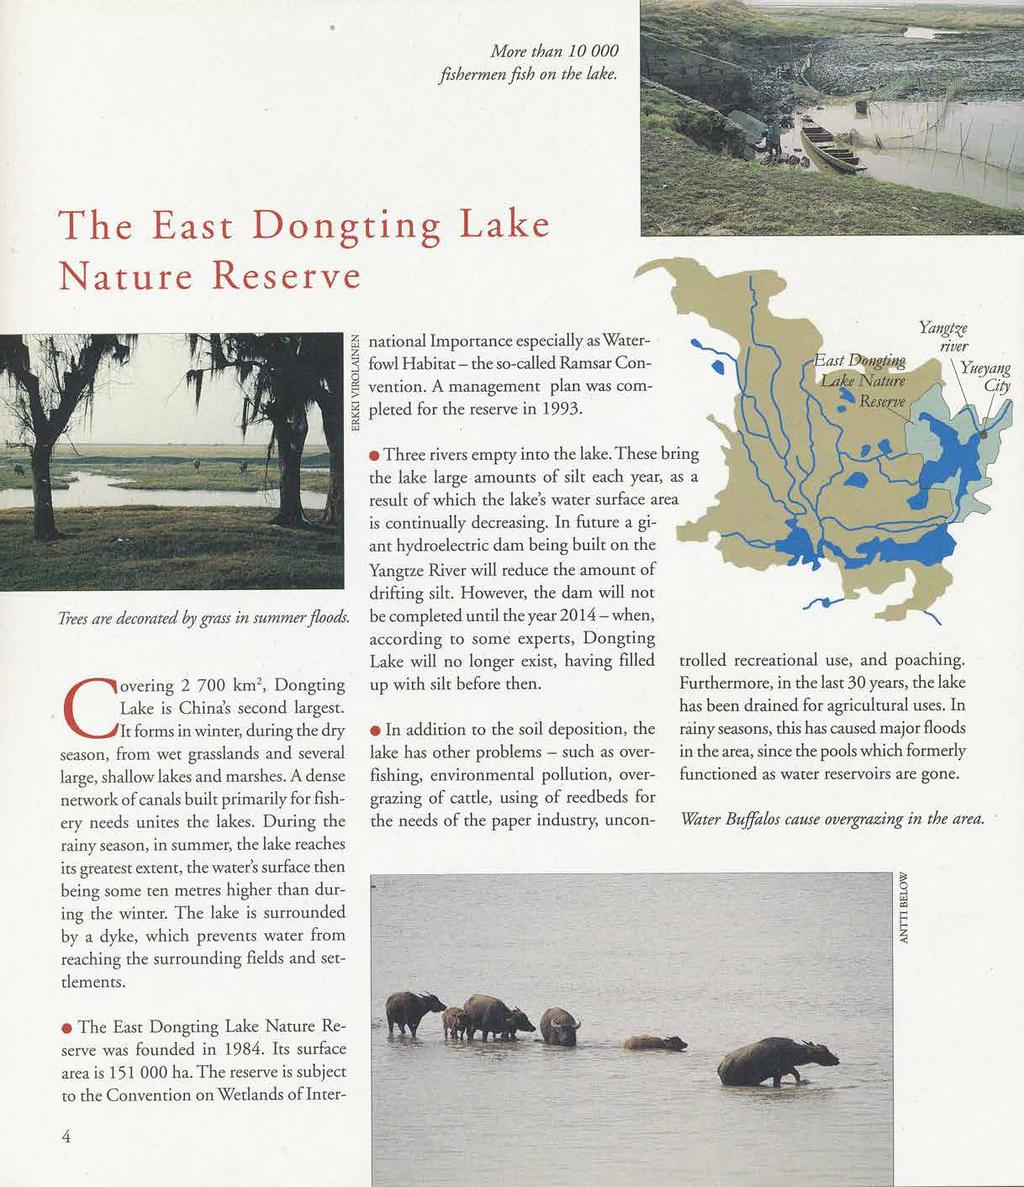 More than 10 000 fisherrnen fish on the lake. The East Dongtitg Lake Nature Reserve z z 3 a national Importance especially as\7aterfowl Habitat- the so-called Ramsar Convention.